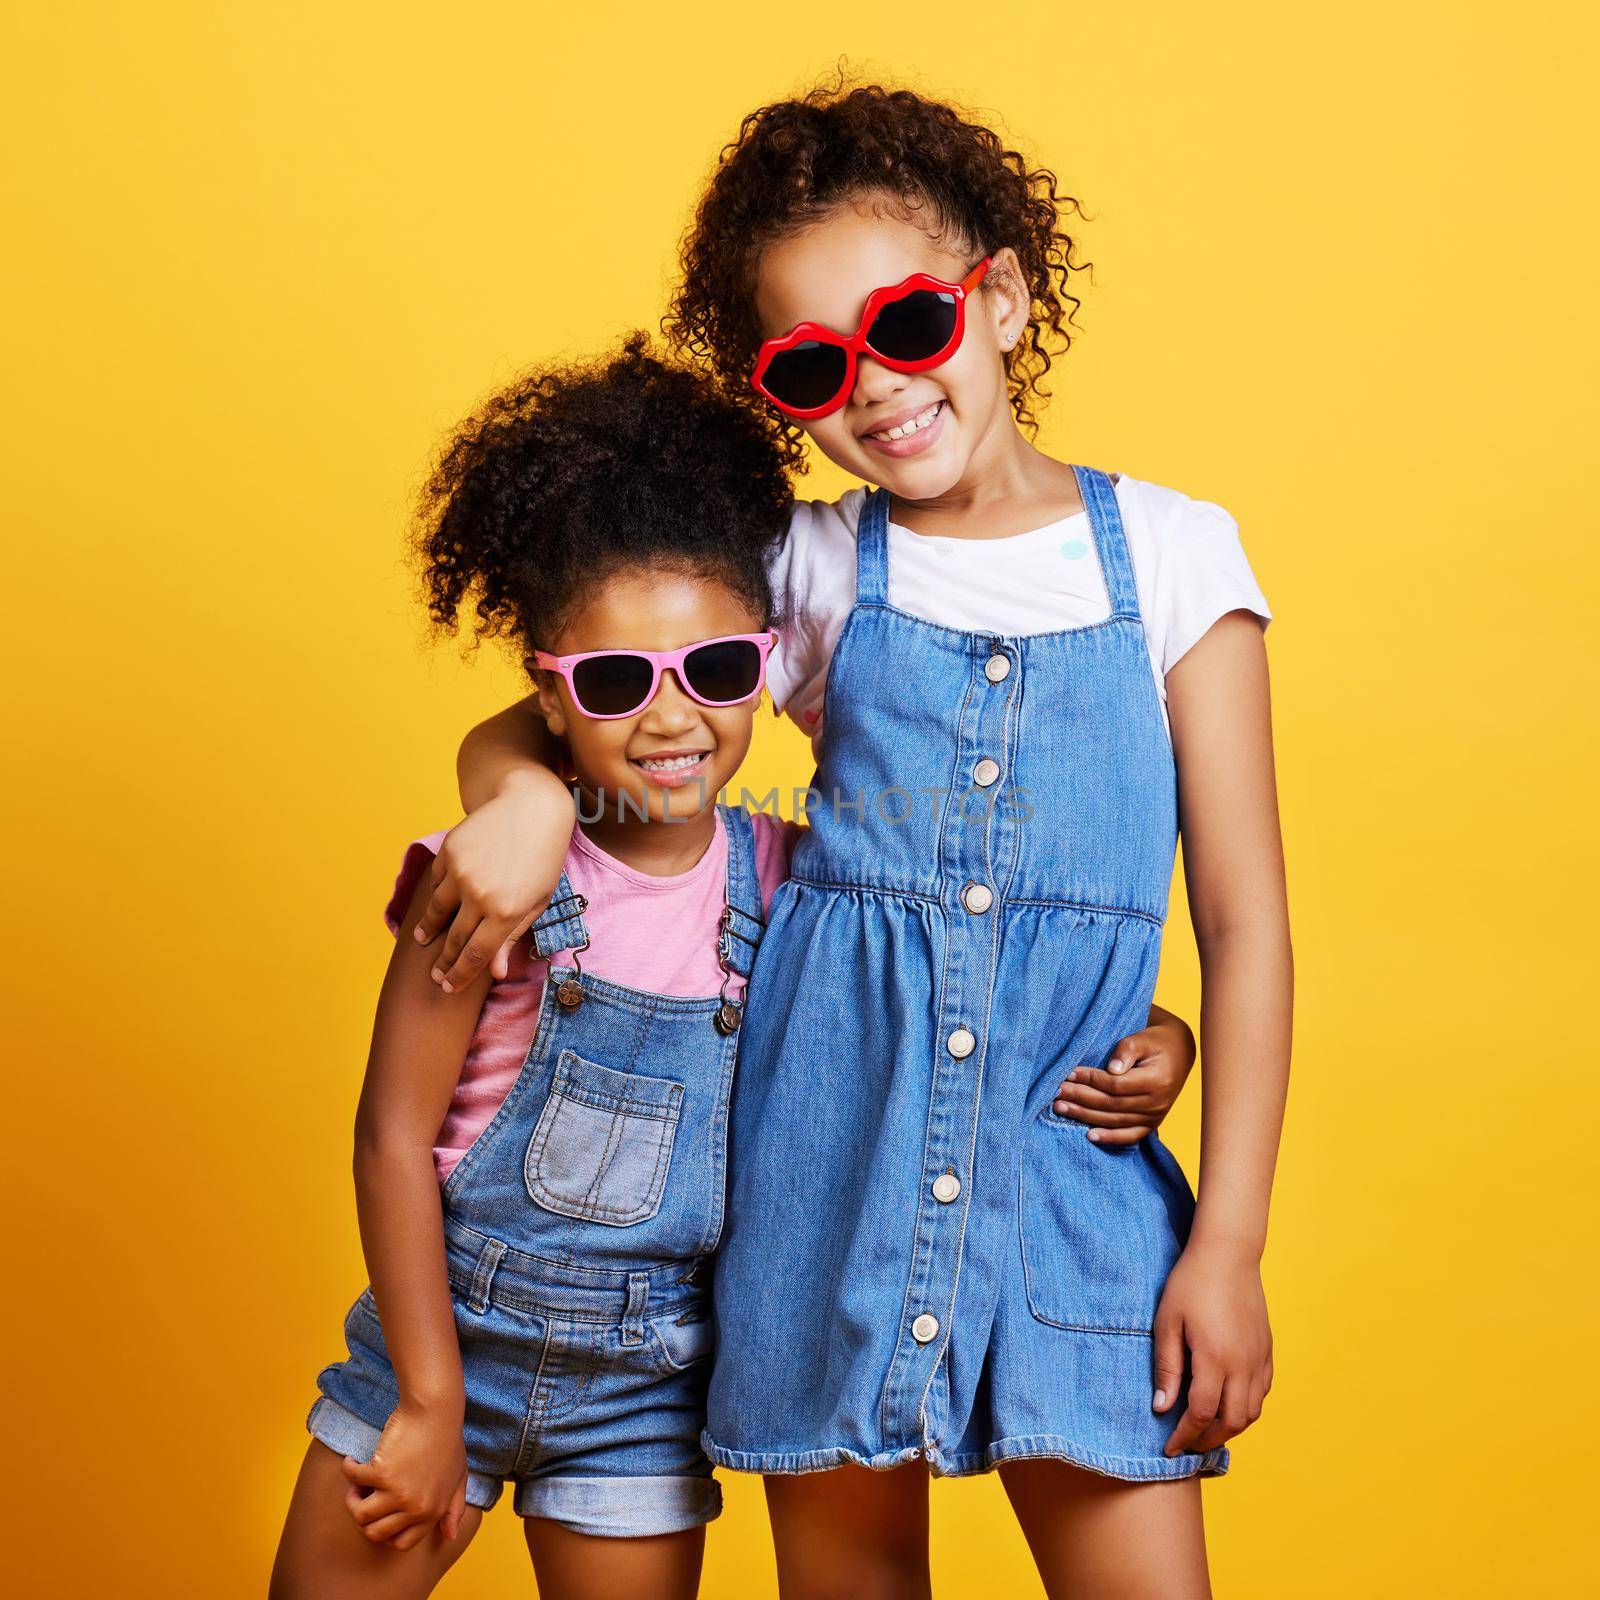 Studio portrait two mixed race girl sisters wearing funky sunglasses Isolated against a yellow background. Cute hispanic children posing inside. Happy and carefree kids imagining being fashion models.